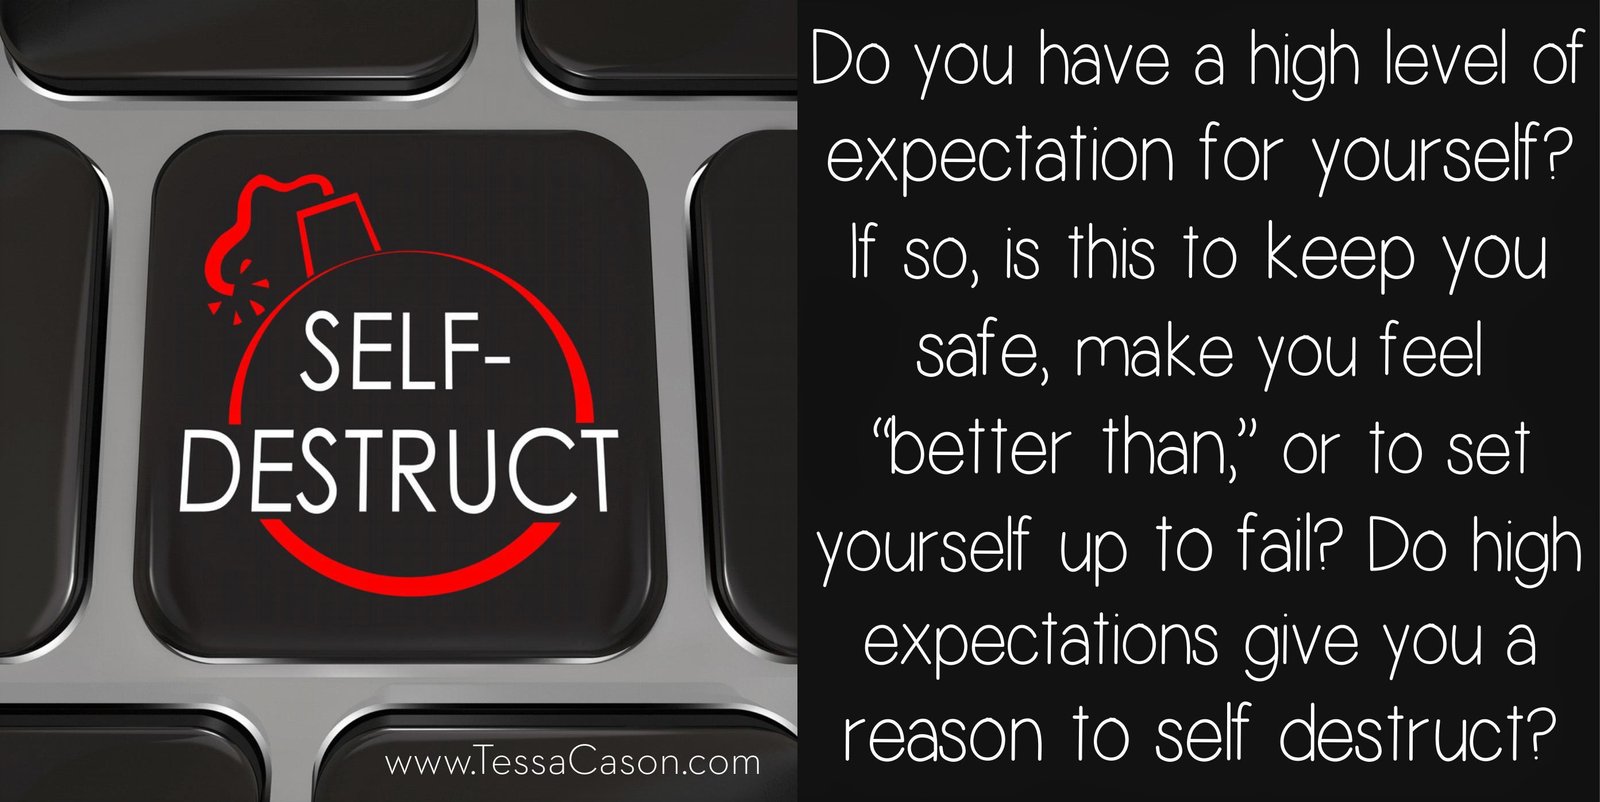 Do you have a high expectation of yourself